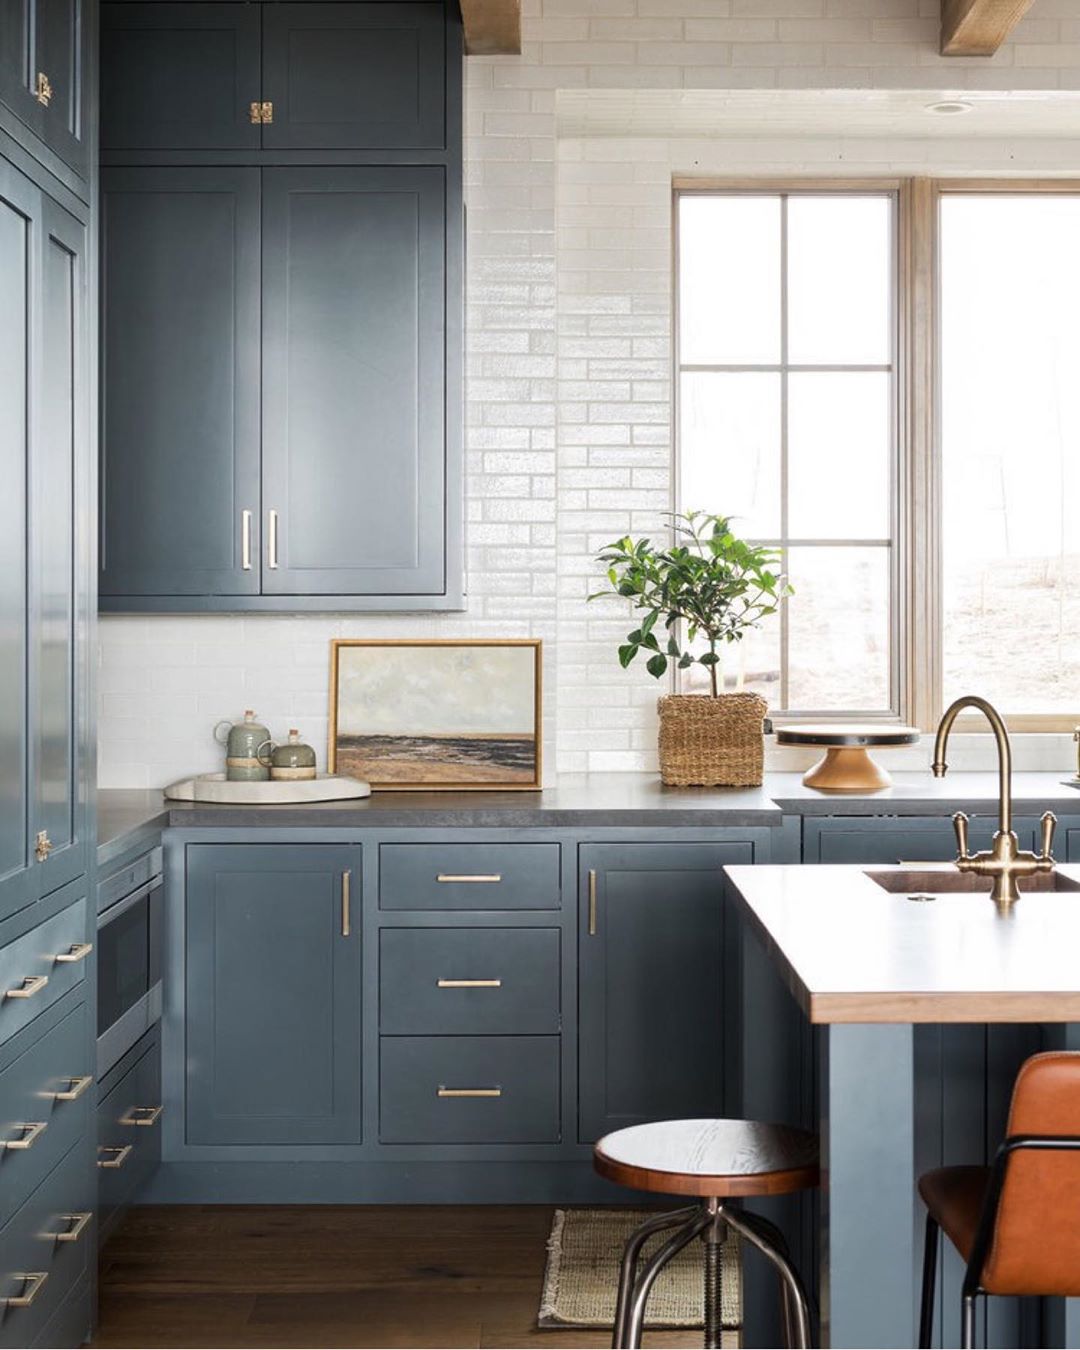 Modern kitchen with blue cabinets. Photo by Instagram user @studiomcgee